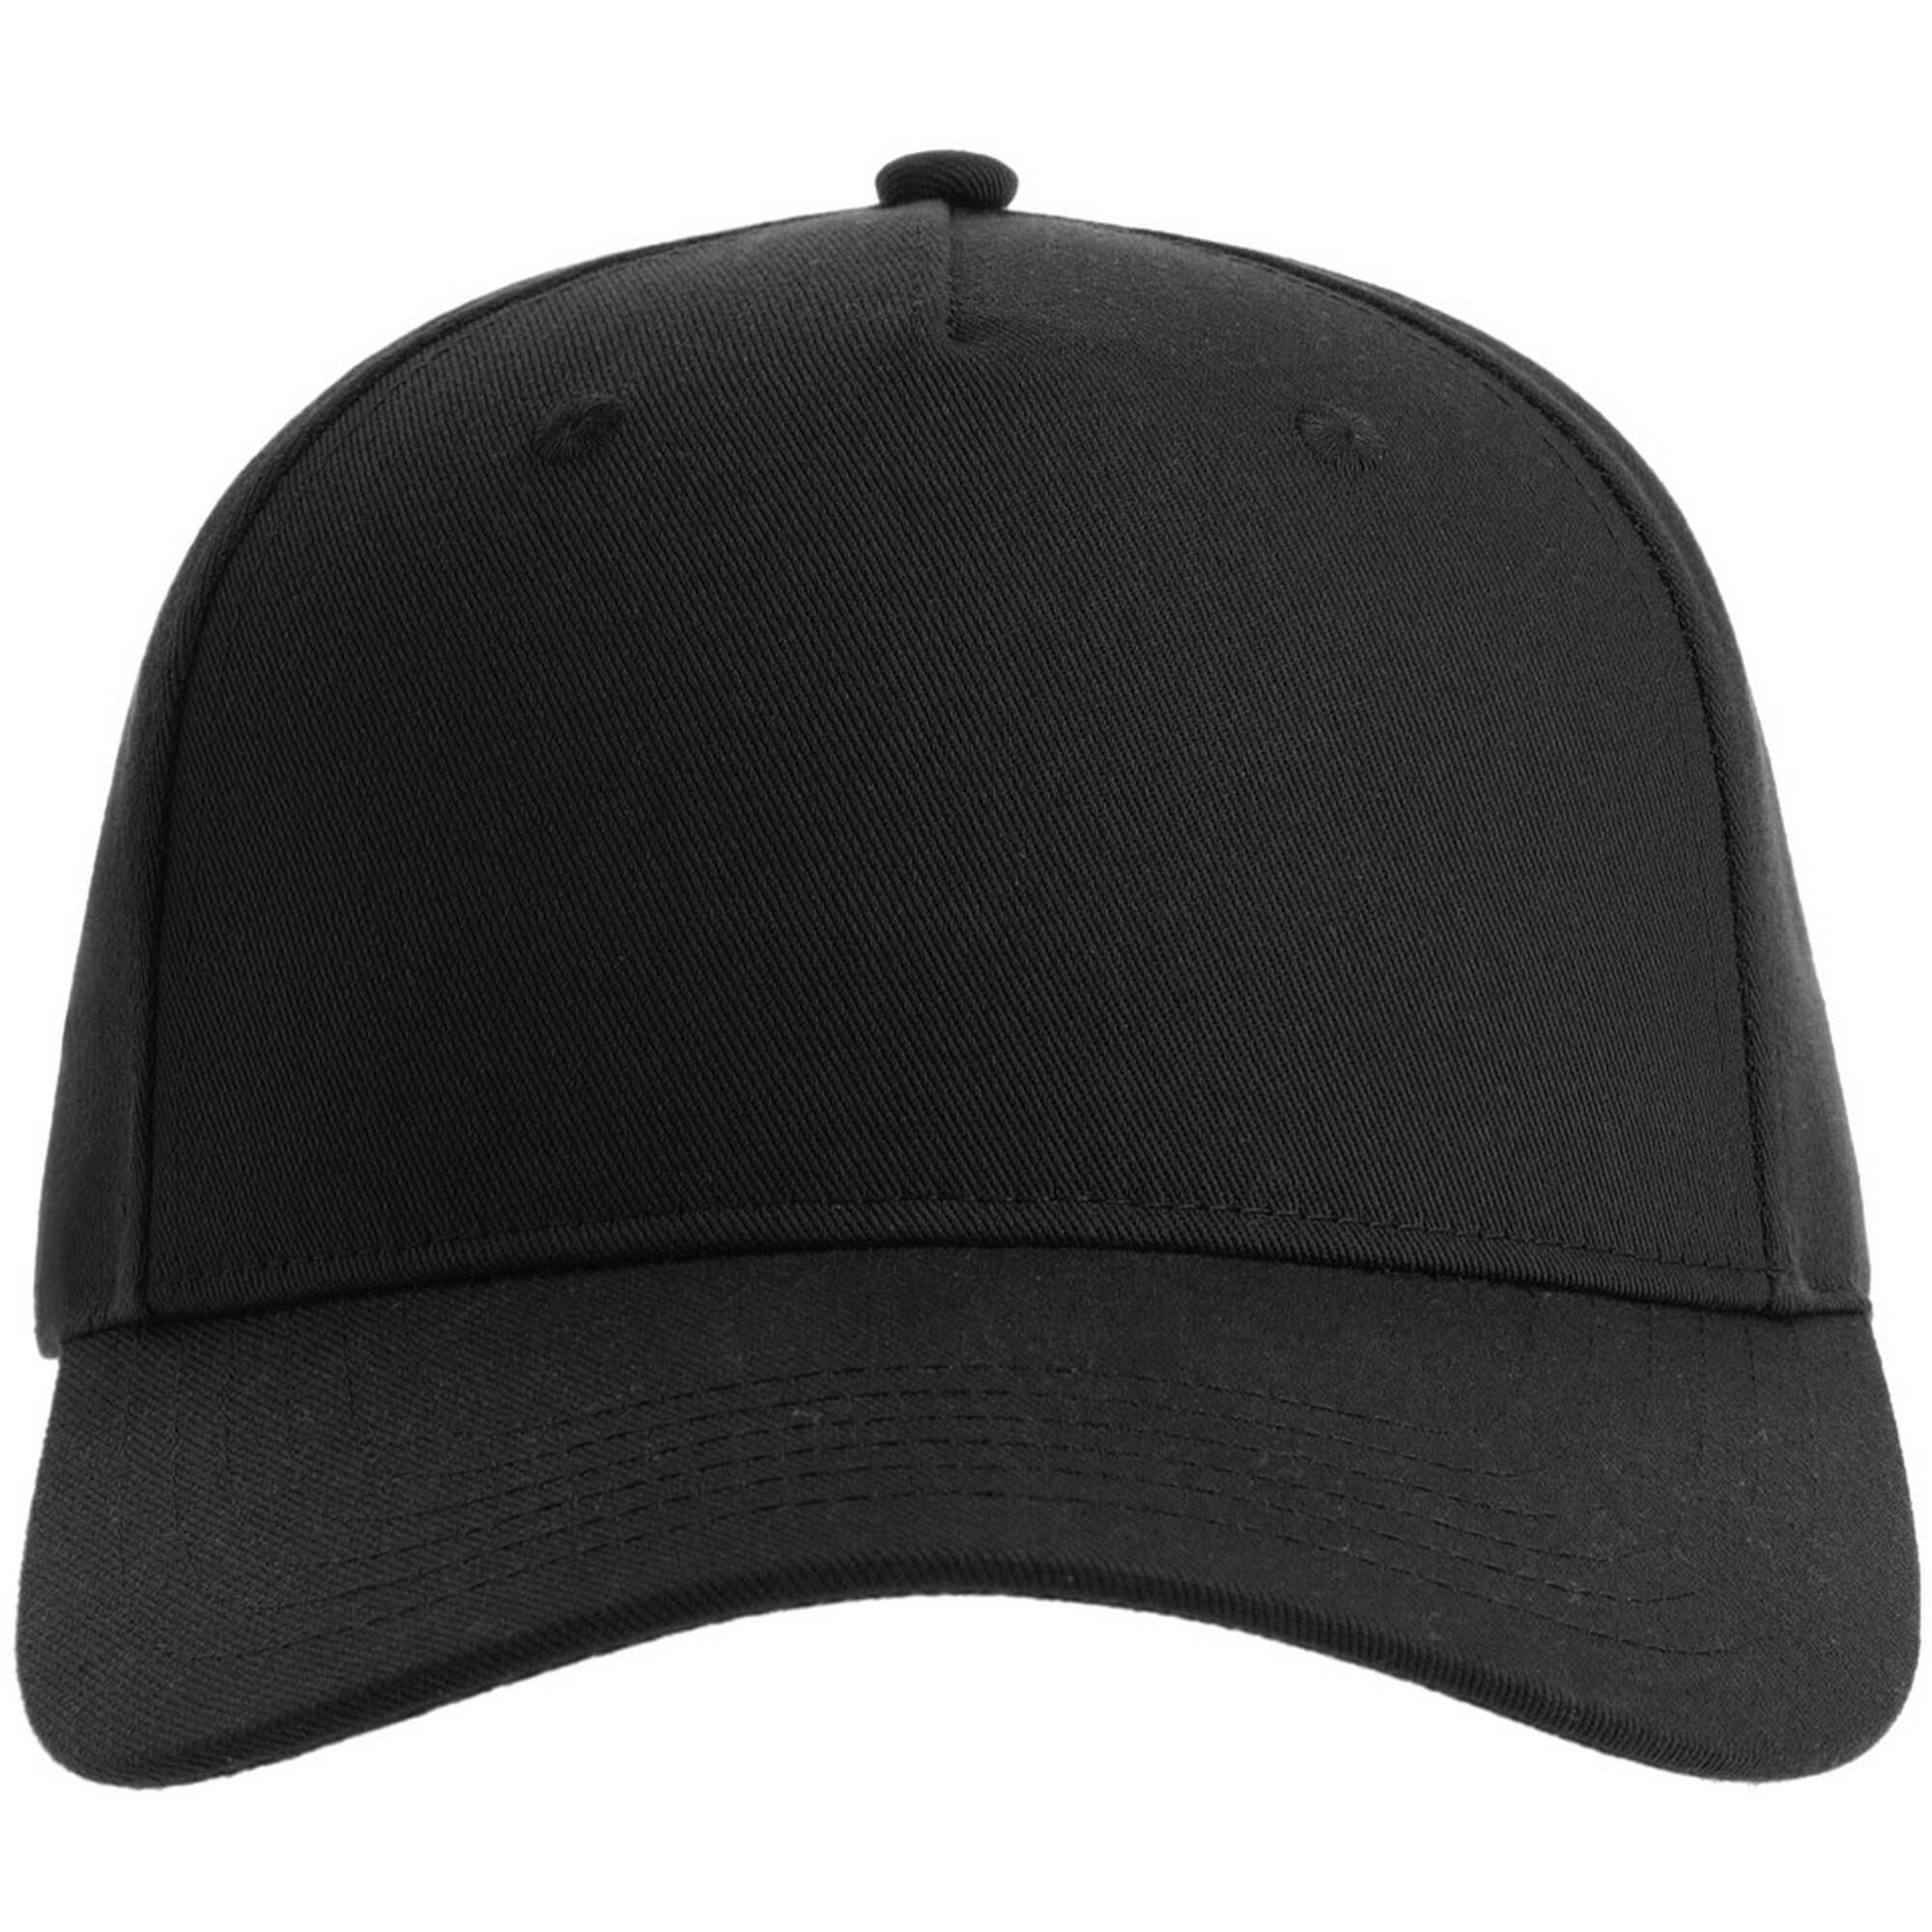 Unisex Adult Fiji Recycled Polyester Cap (Black) 1/3